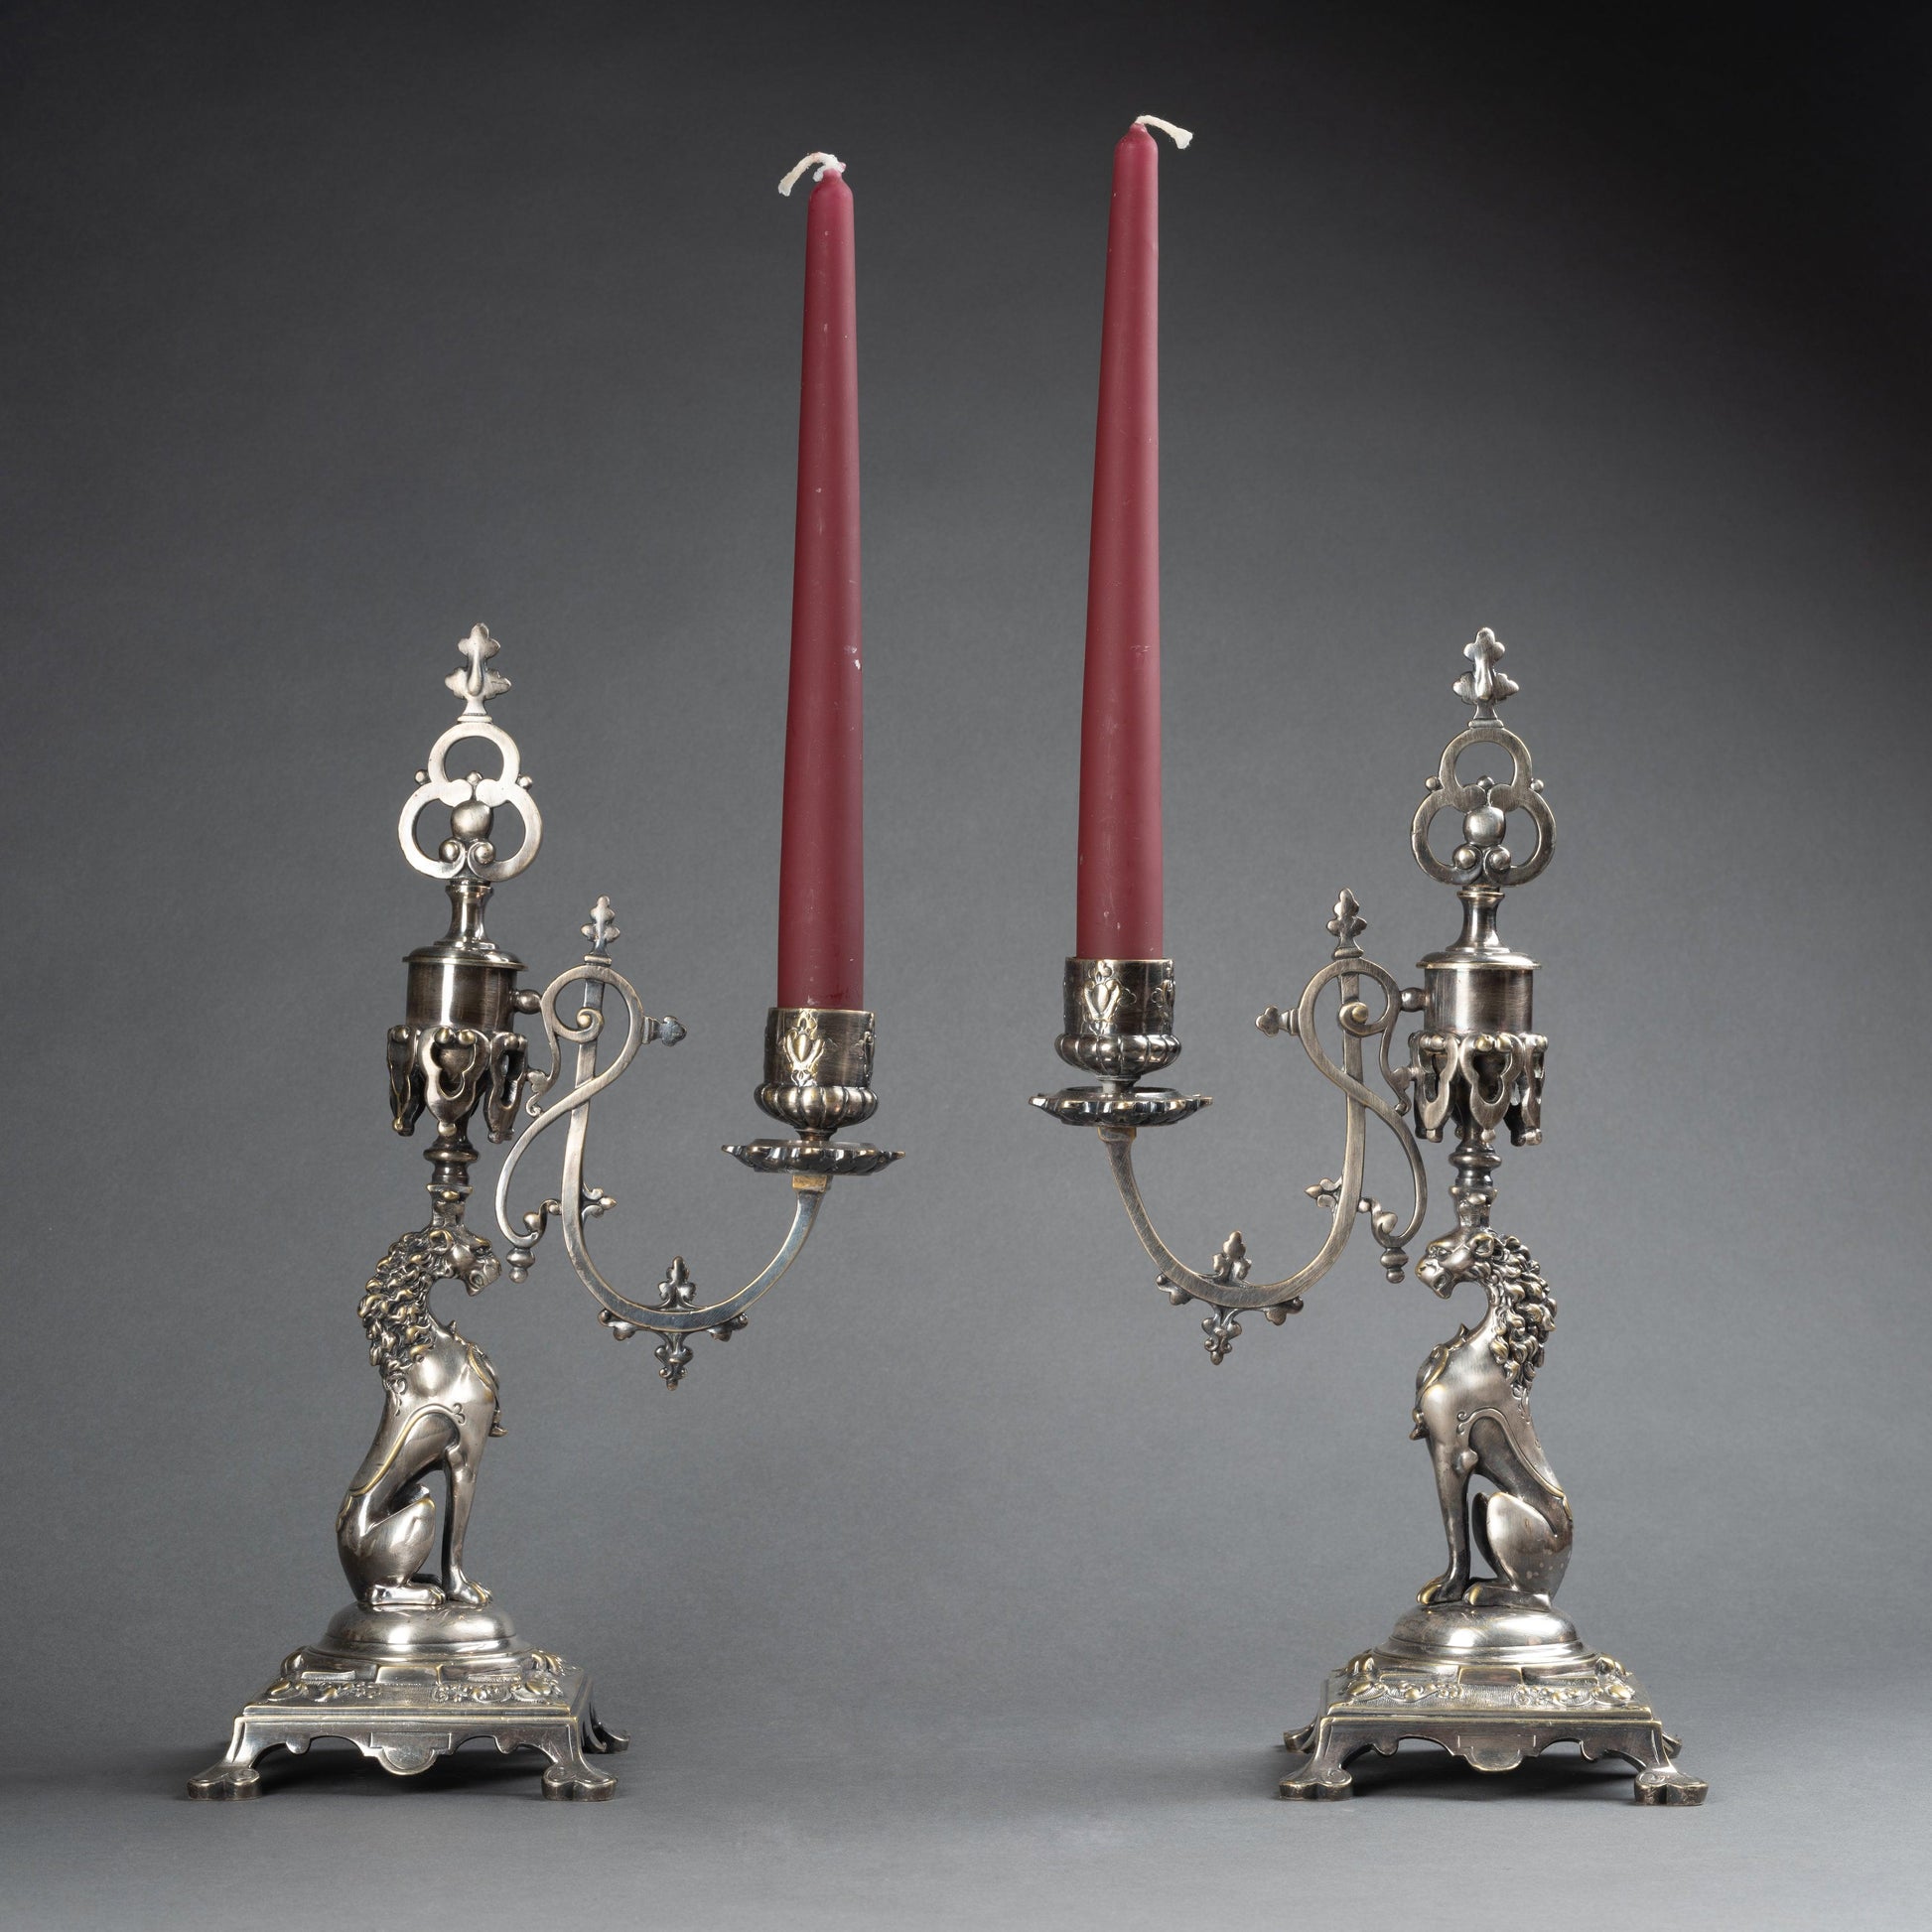 A PAIR OF FRENCH 19TH CENTURY NEO-RENAISSANCE ST. SILVERED METAL CANDLESTICKS - Galerie Rosiers